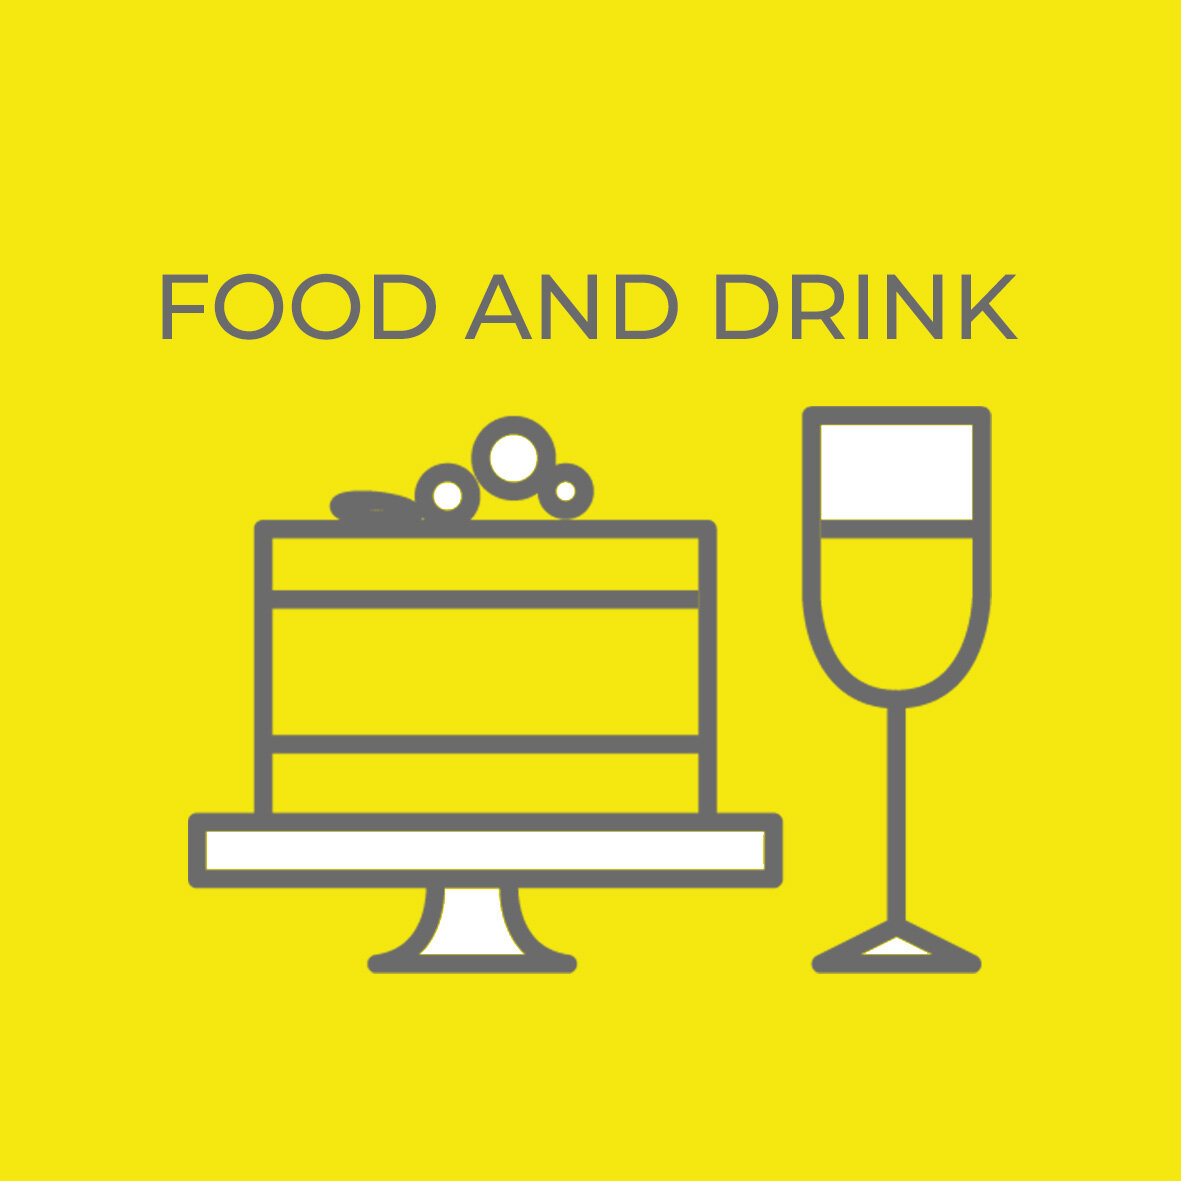 Food and drink button.jpg